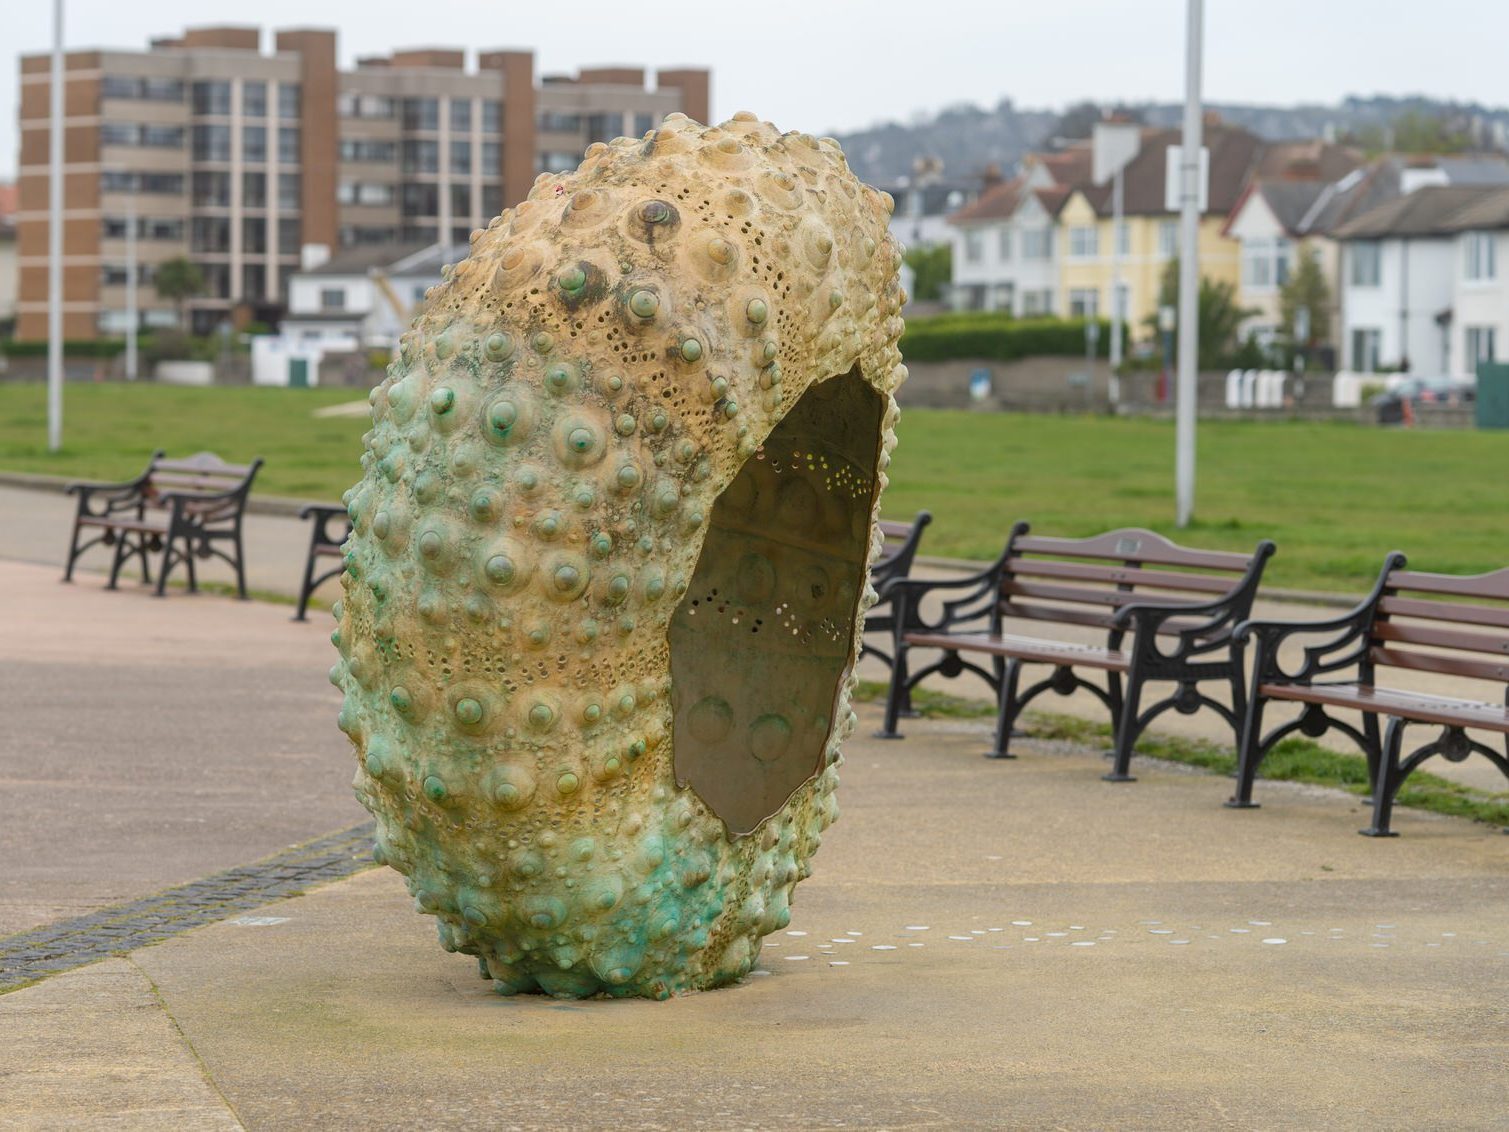 I REALLY LIKE THIS SCULPTURE BY RACHEL JOTNT [NEWTOWNSMITH IN SANDYCOVE] 001